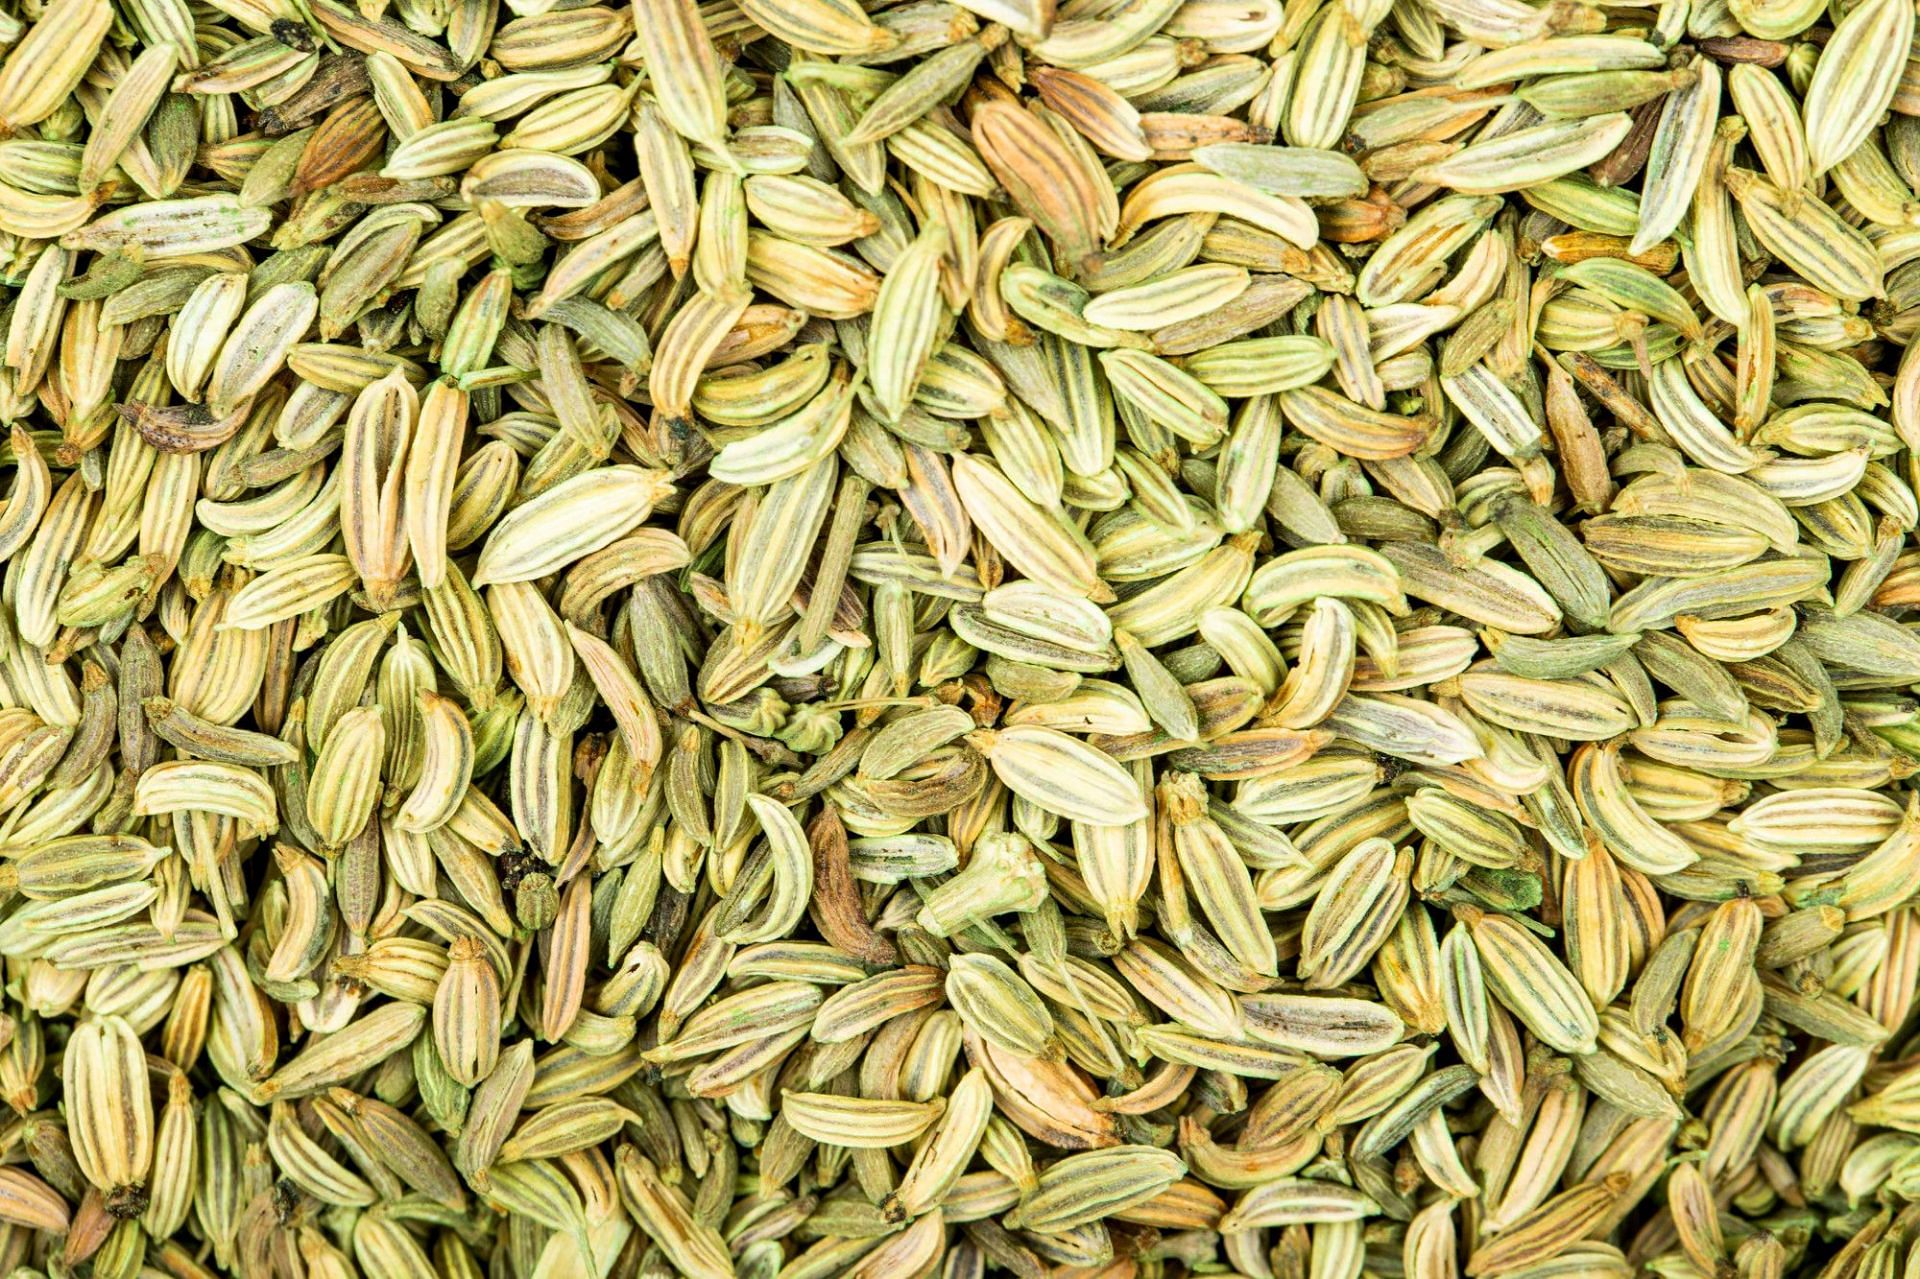 Fennel is often used as a mouth-freshener because of its ability to fight mouth odor (Image by Stockking on Freepik)